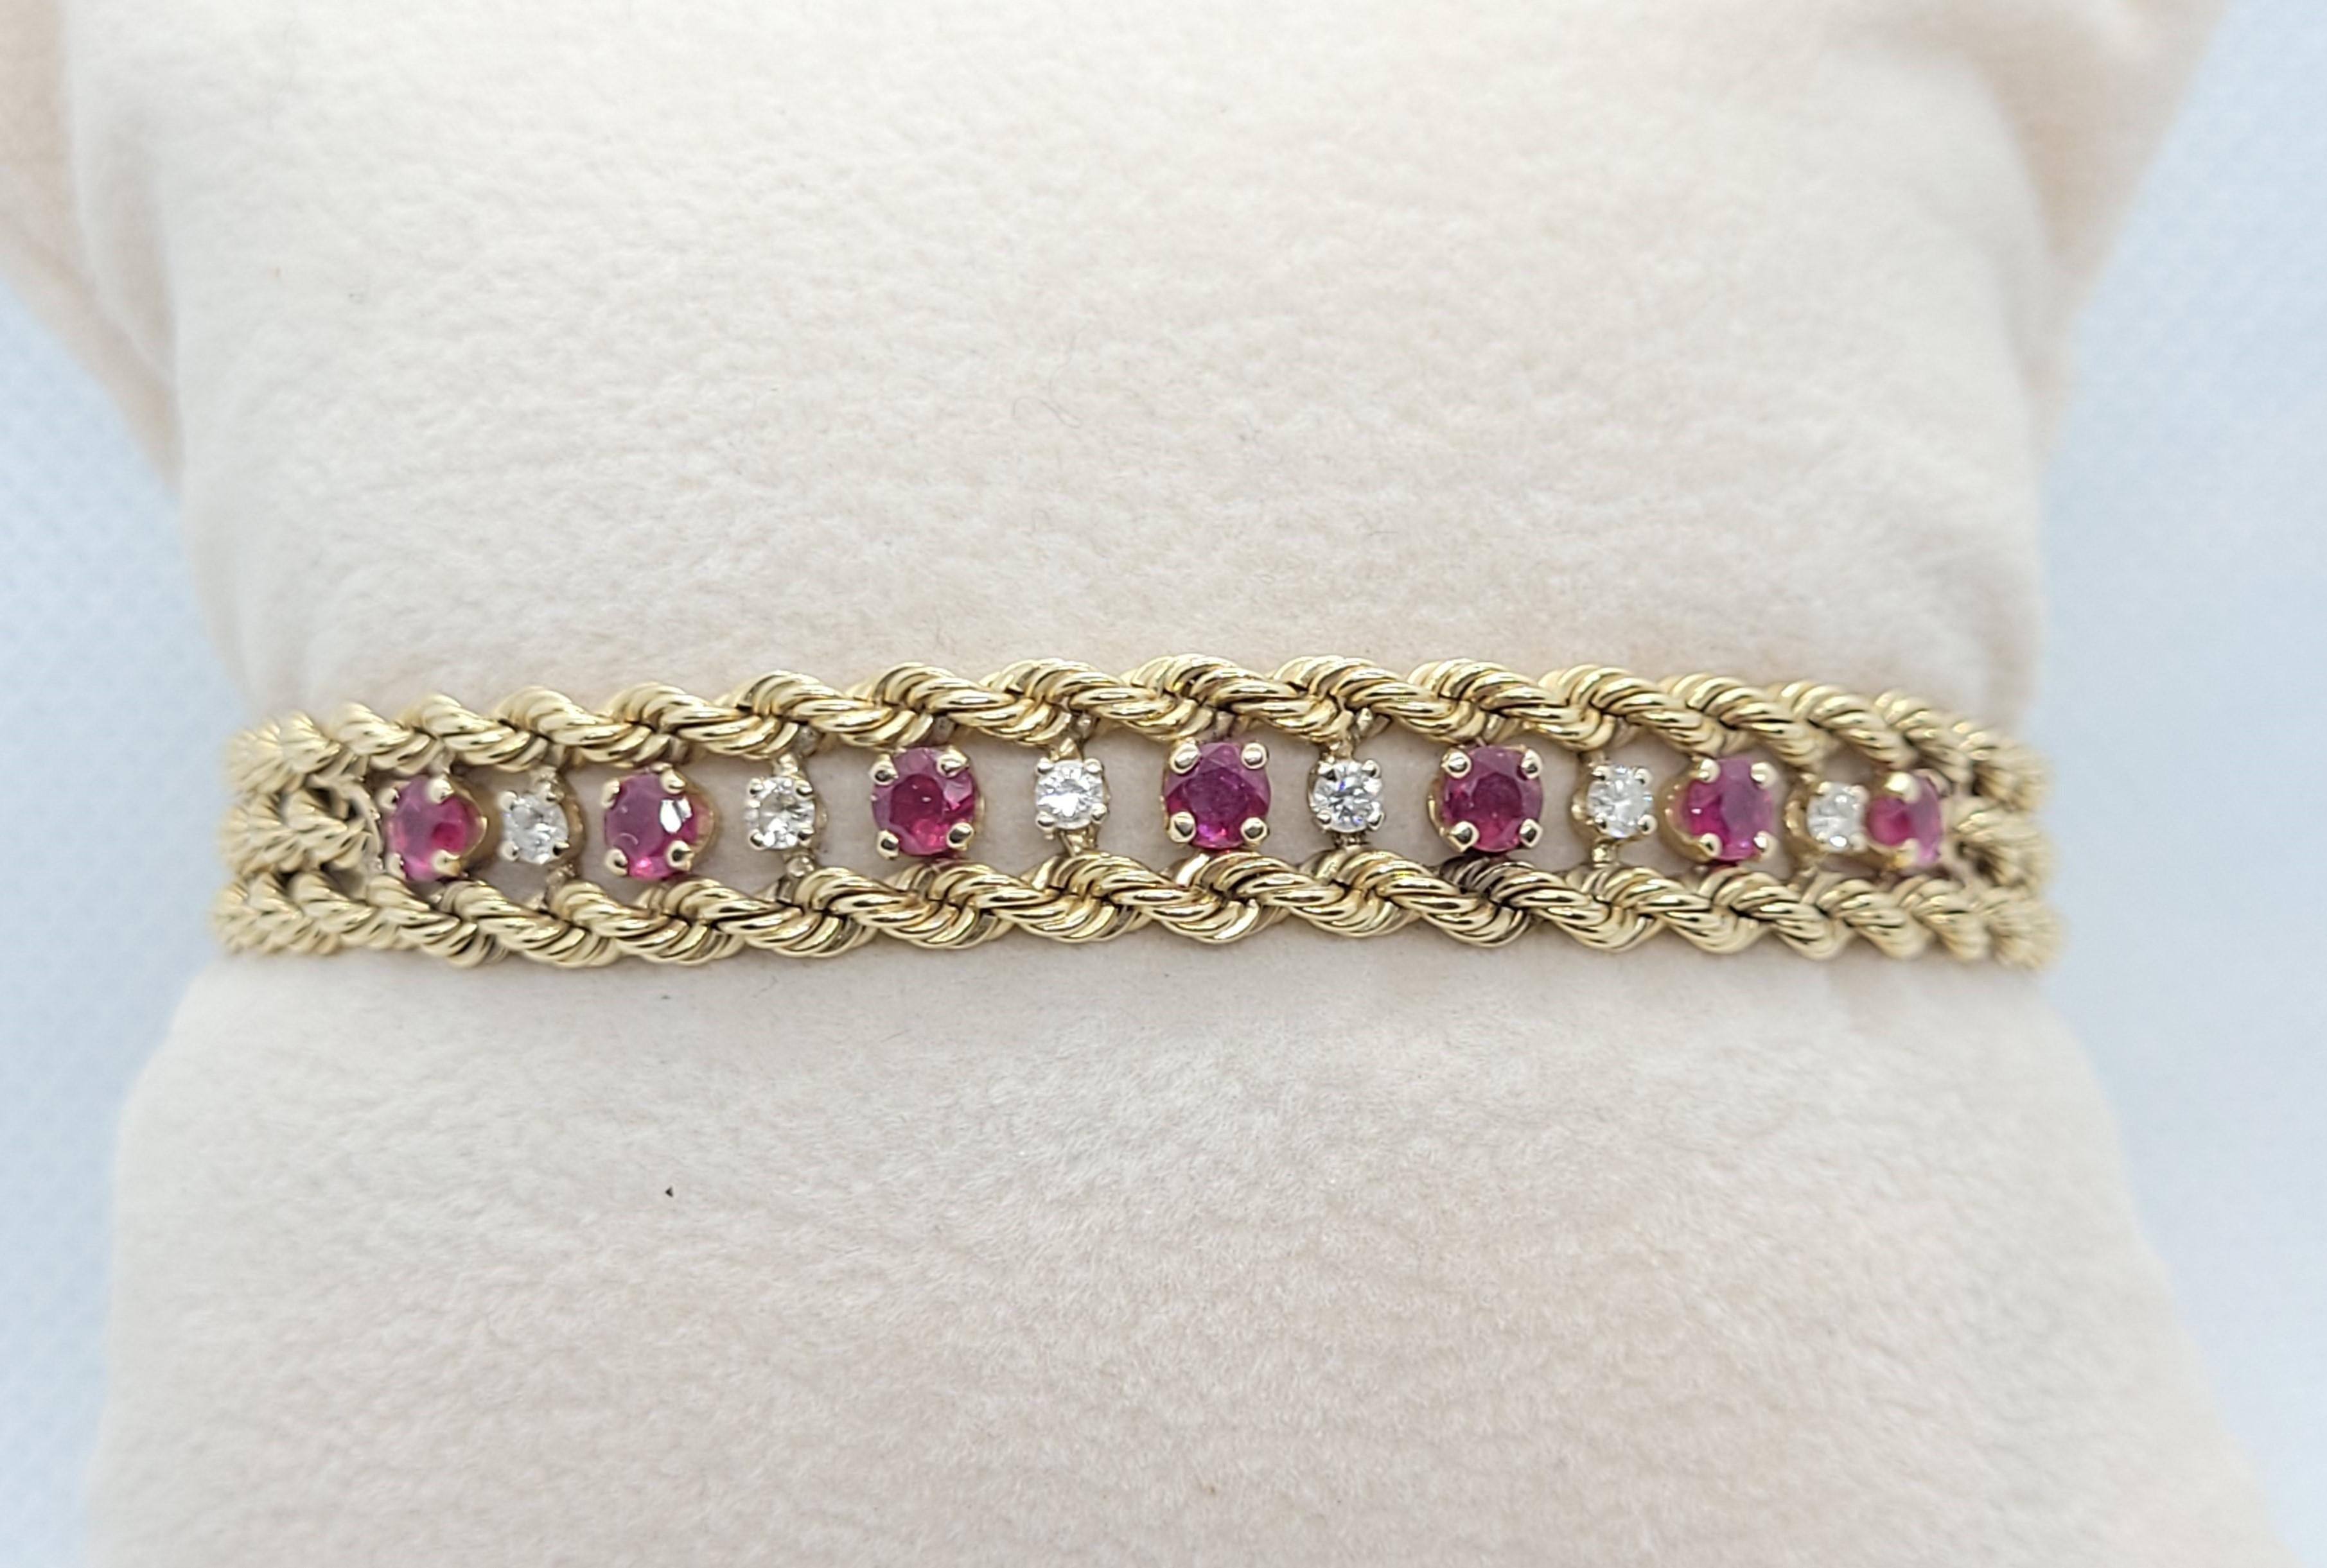 14kt Yellow Gold Ruby and Diamond Rope Bracelet, 17.3 grams, 7 inches long, 7 - 3mm Rubies, 6 - 2mm Diamonds, 8.3 mm wide, Push-In Clasp, figure 8 safety.  This bracelet is in good condition. The diamonds are g/h in color and si in clarity.